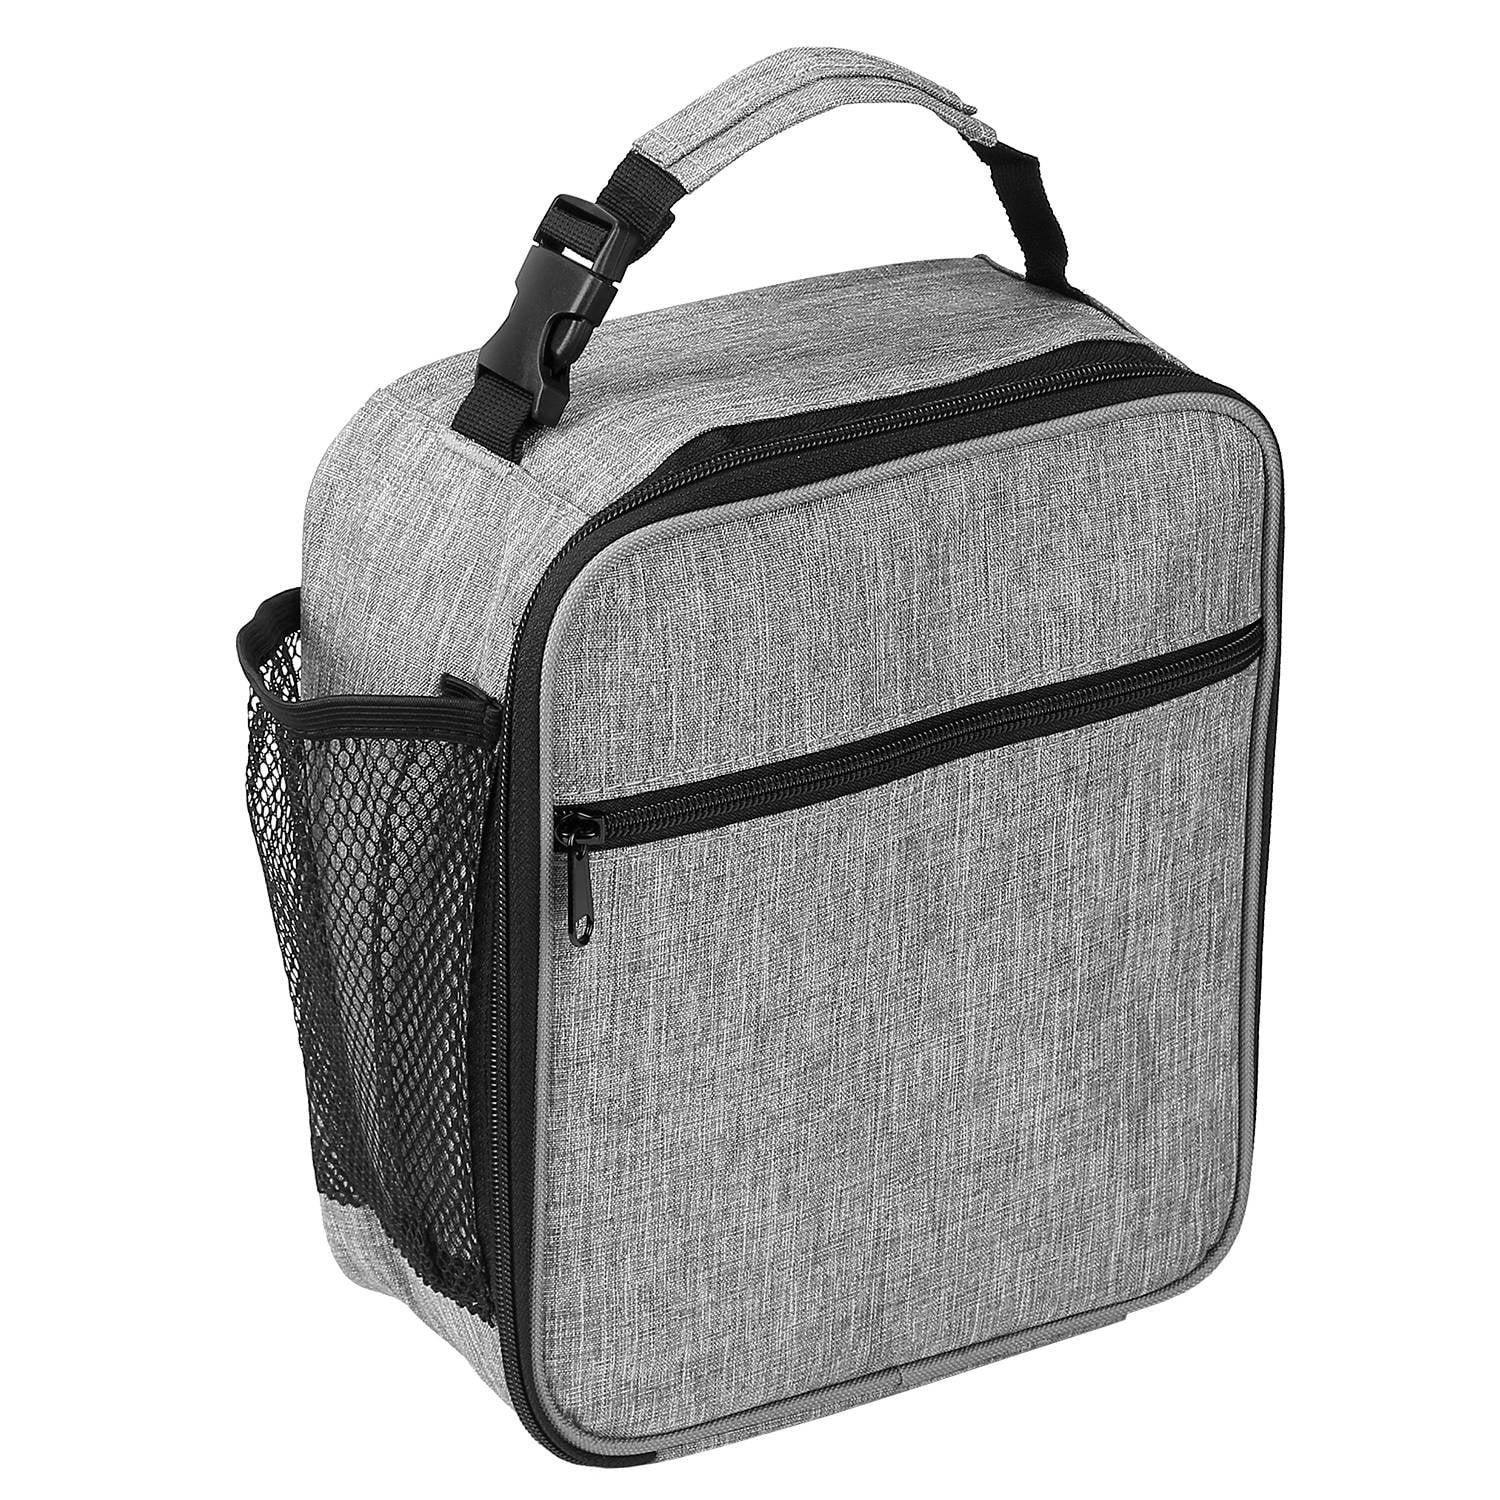 Built Insulated Lunch Bag with 'The Stylist' Design, ys/m, Grey/White